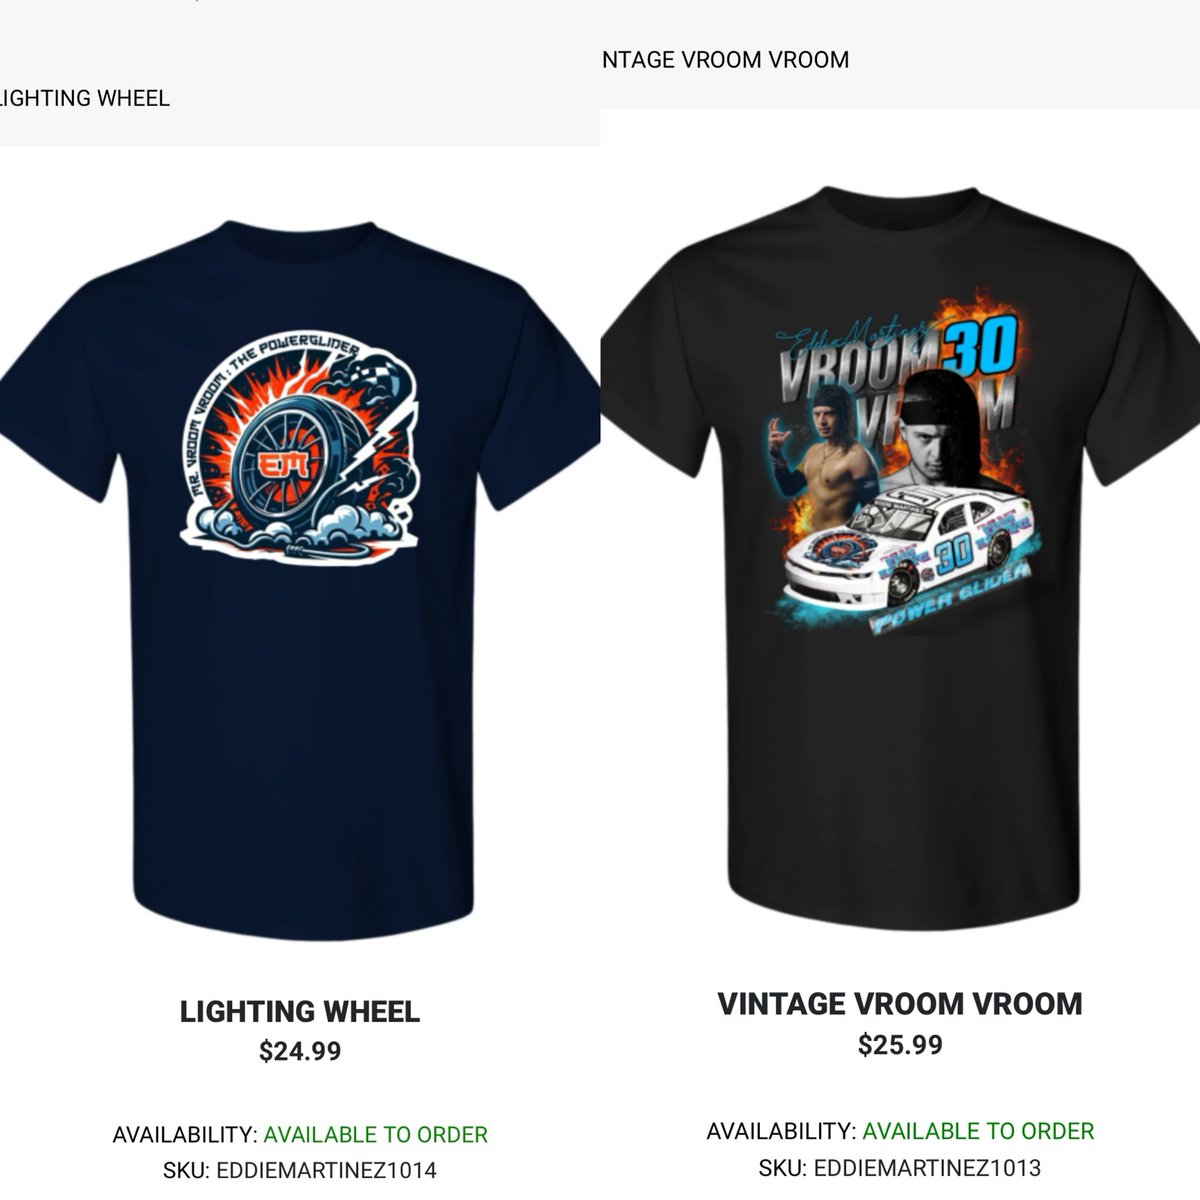 🚨 MERCH ALERT 🚨 Two new shirts are now available on my pro wrestling tee store.‼️ Get the latest merch asap 💯 🏬: prowrestlingtees.com/powerglider?fb… Design by: @DailyOoze and fight night design.